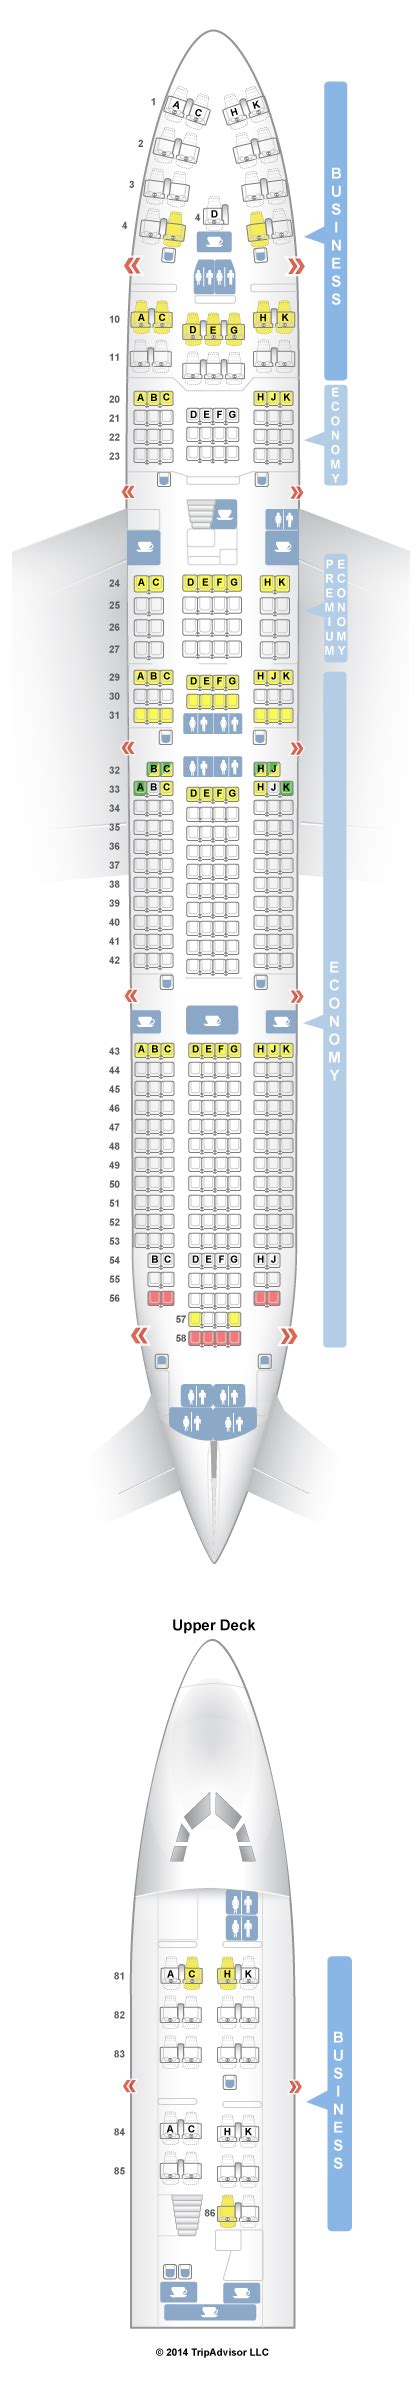 Boeing 747-8 (748) Lufthansa Seat Maps Do you know this plane? Seating details Seat map key Traveler photos (24) View all In-flight amenities Audio Video AC Power Internet …. 